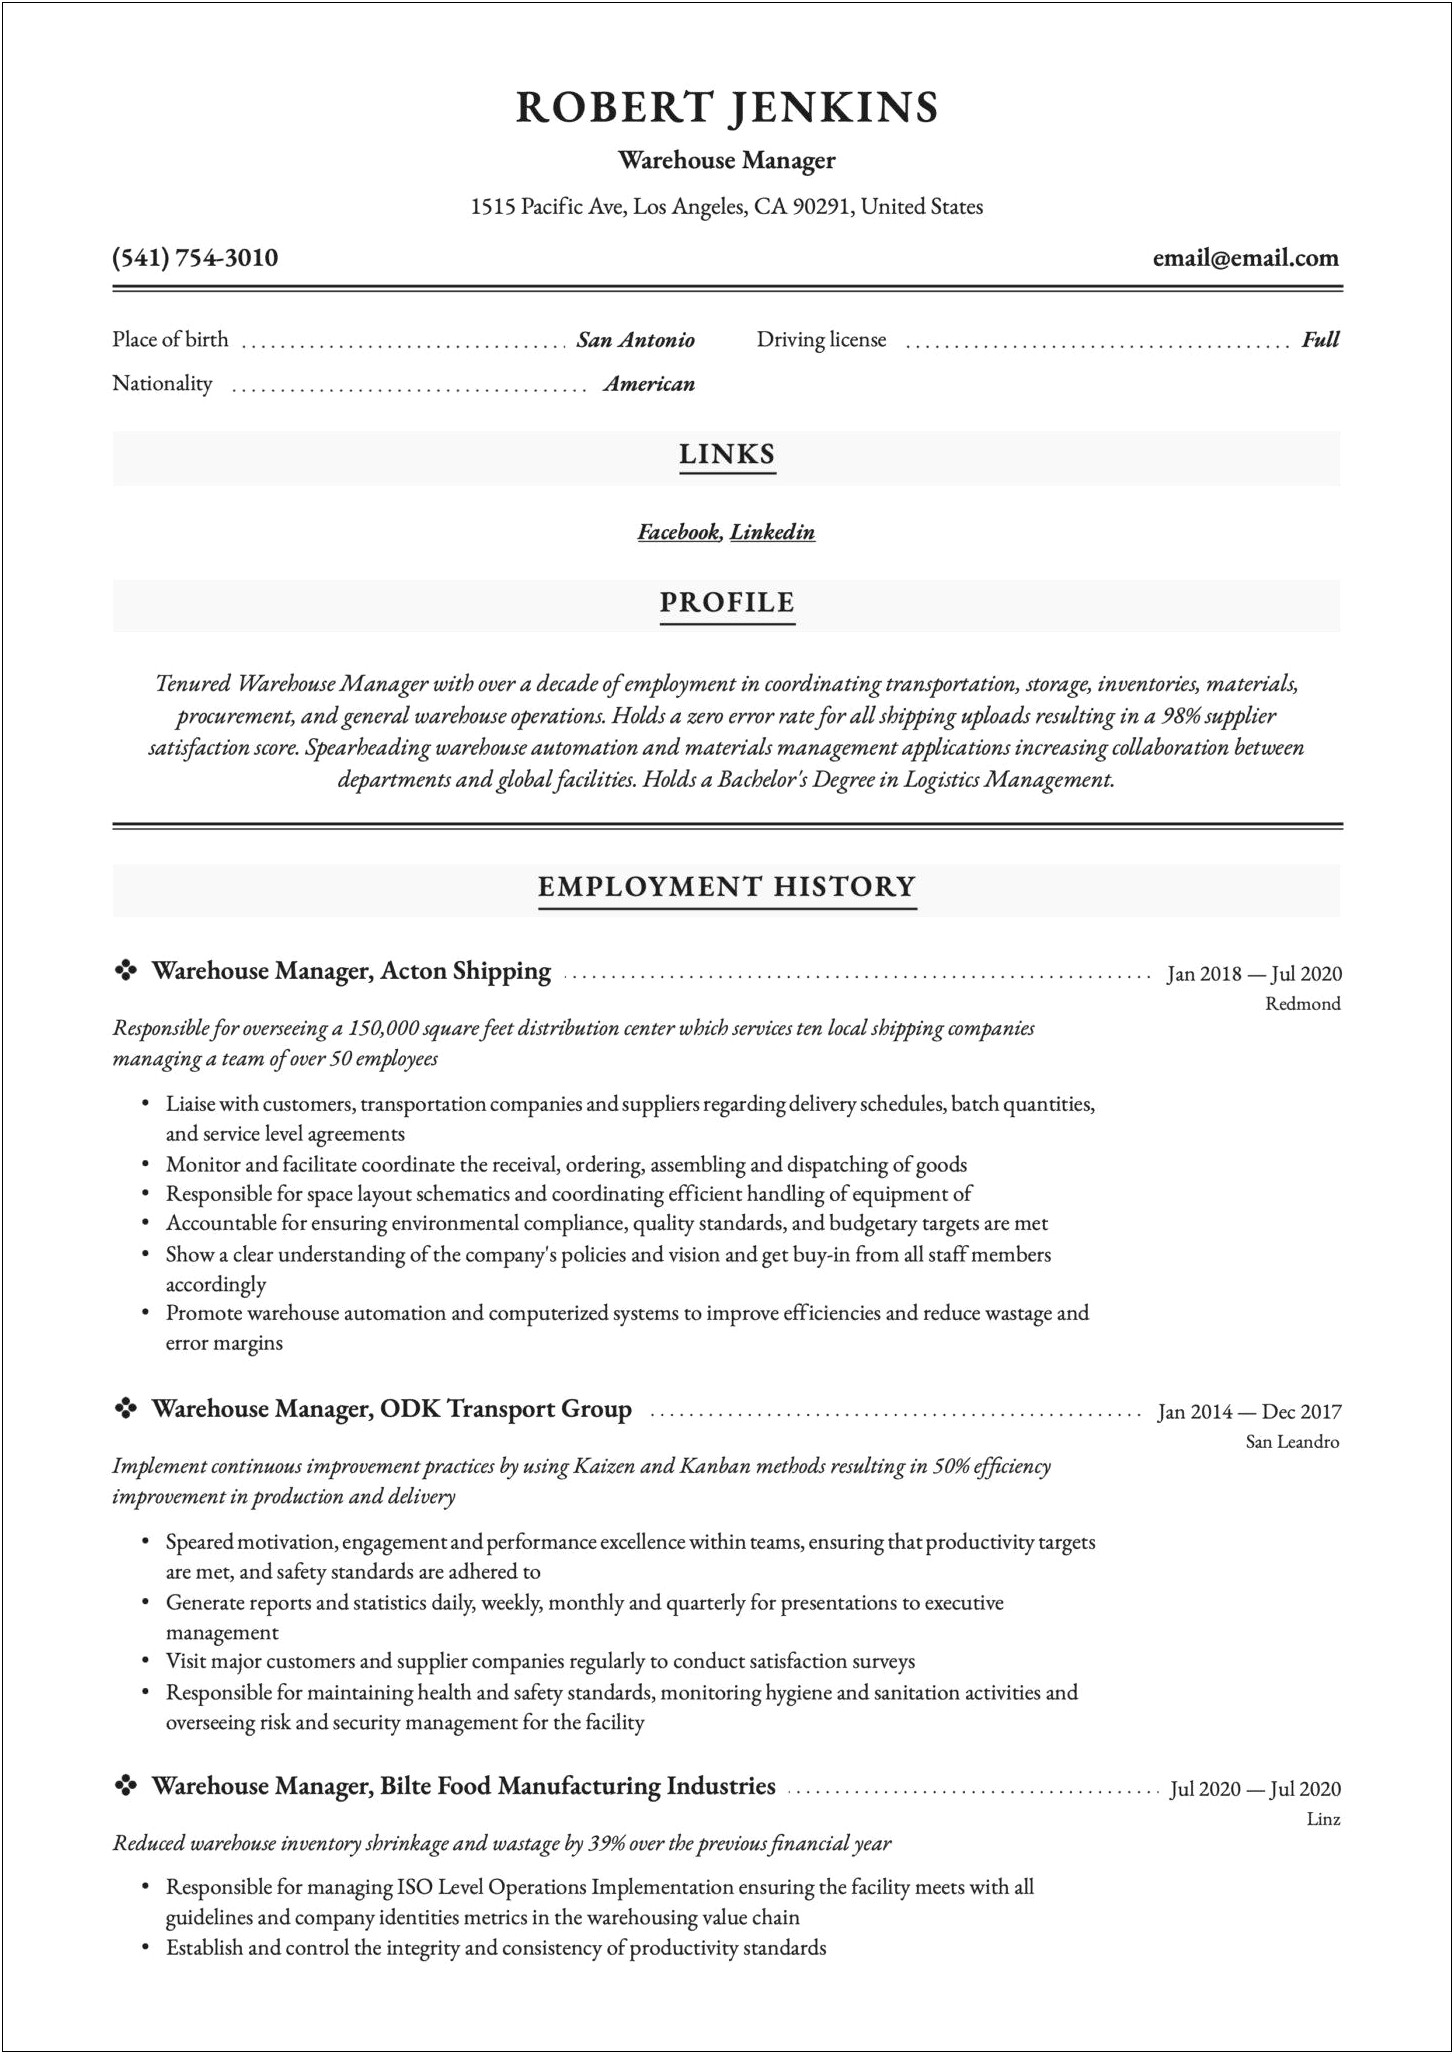 Resume Objective Statement For Warehouse Job